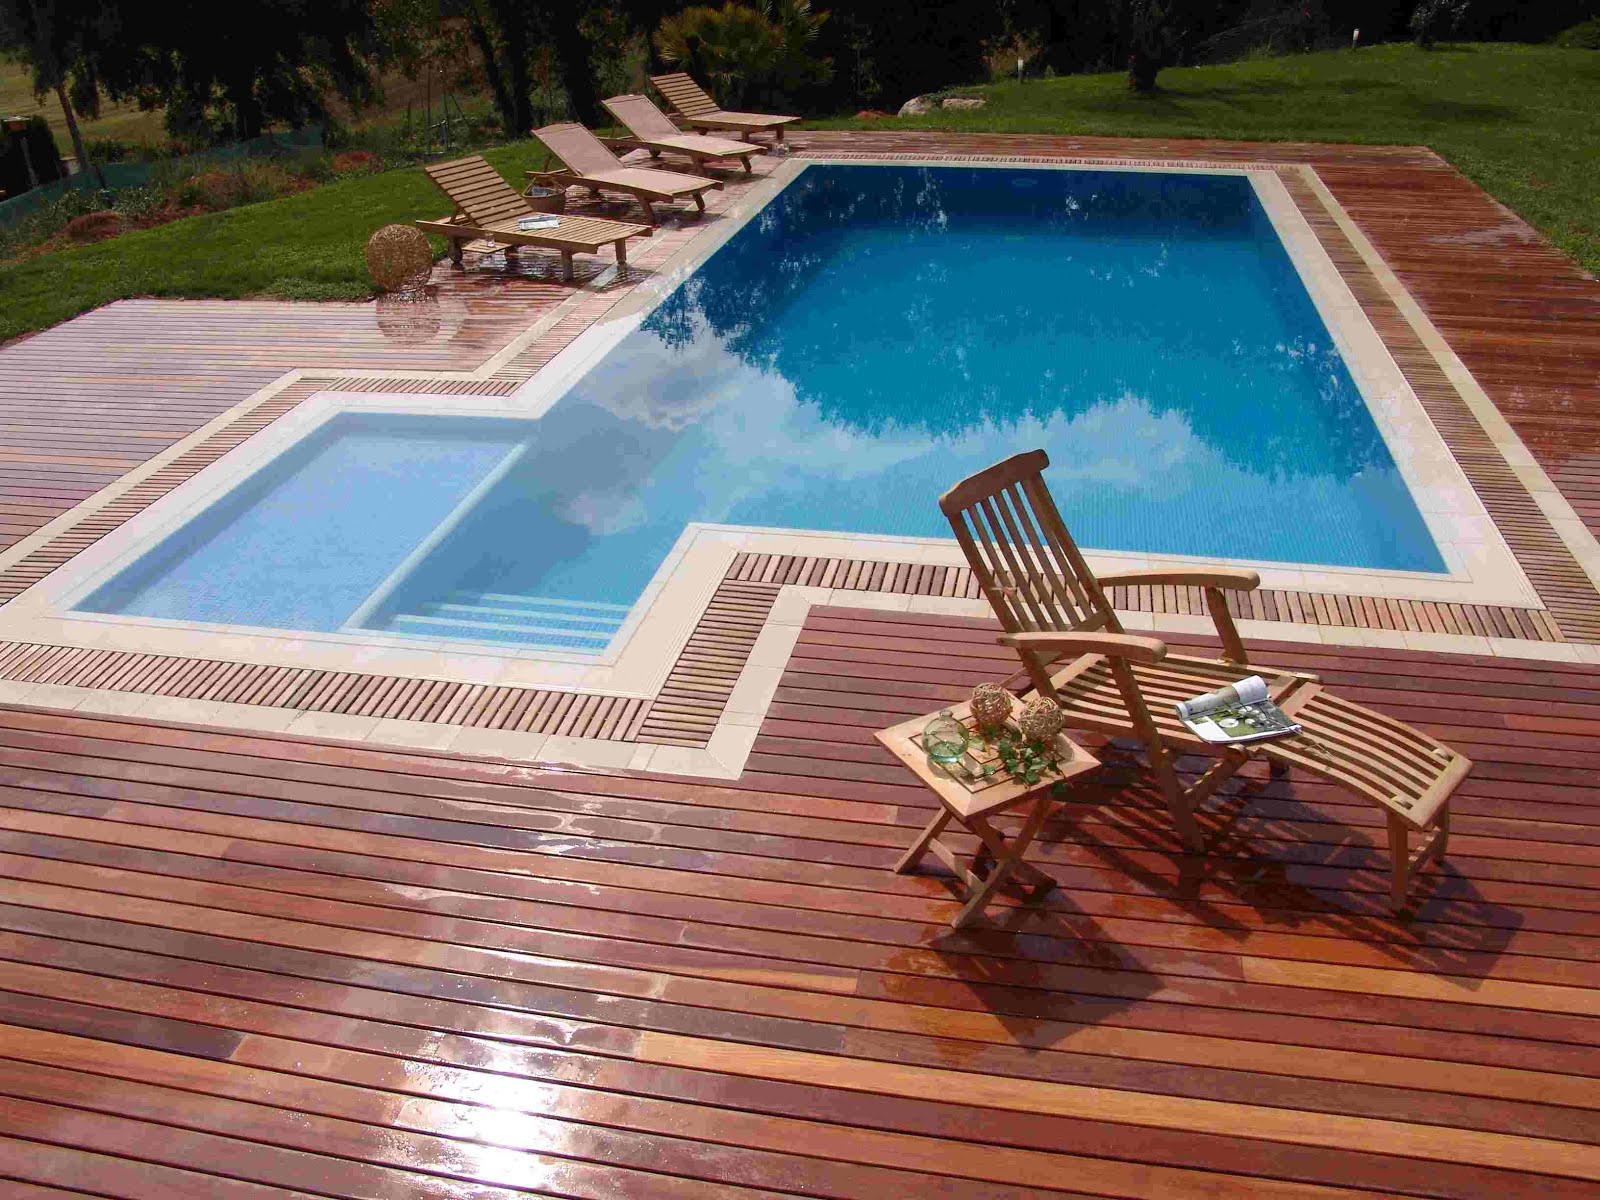 Choose us if you find the best quality for your swimming pool. Why?  Because we are the experts